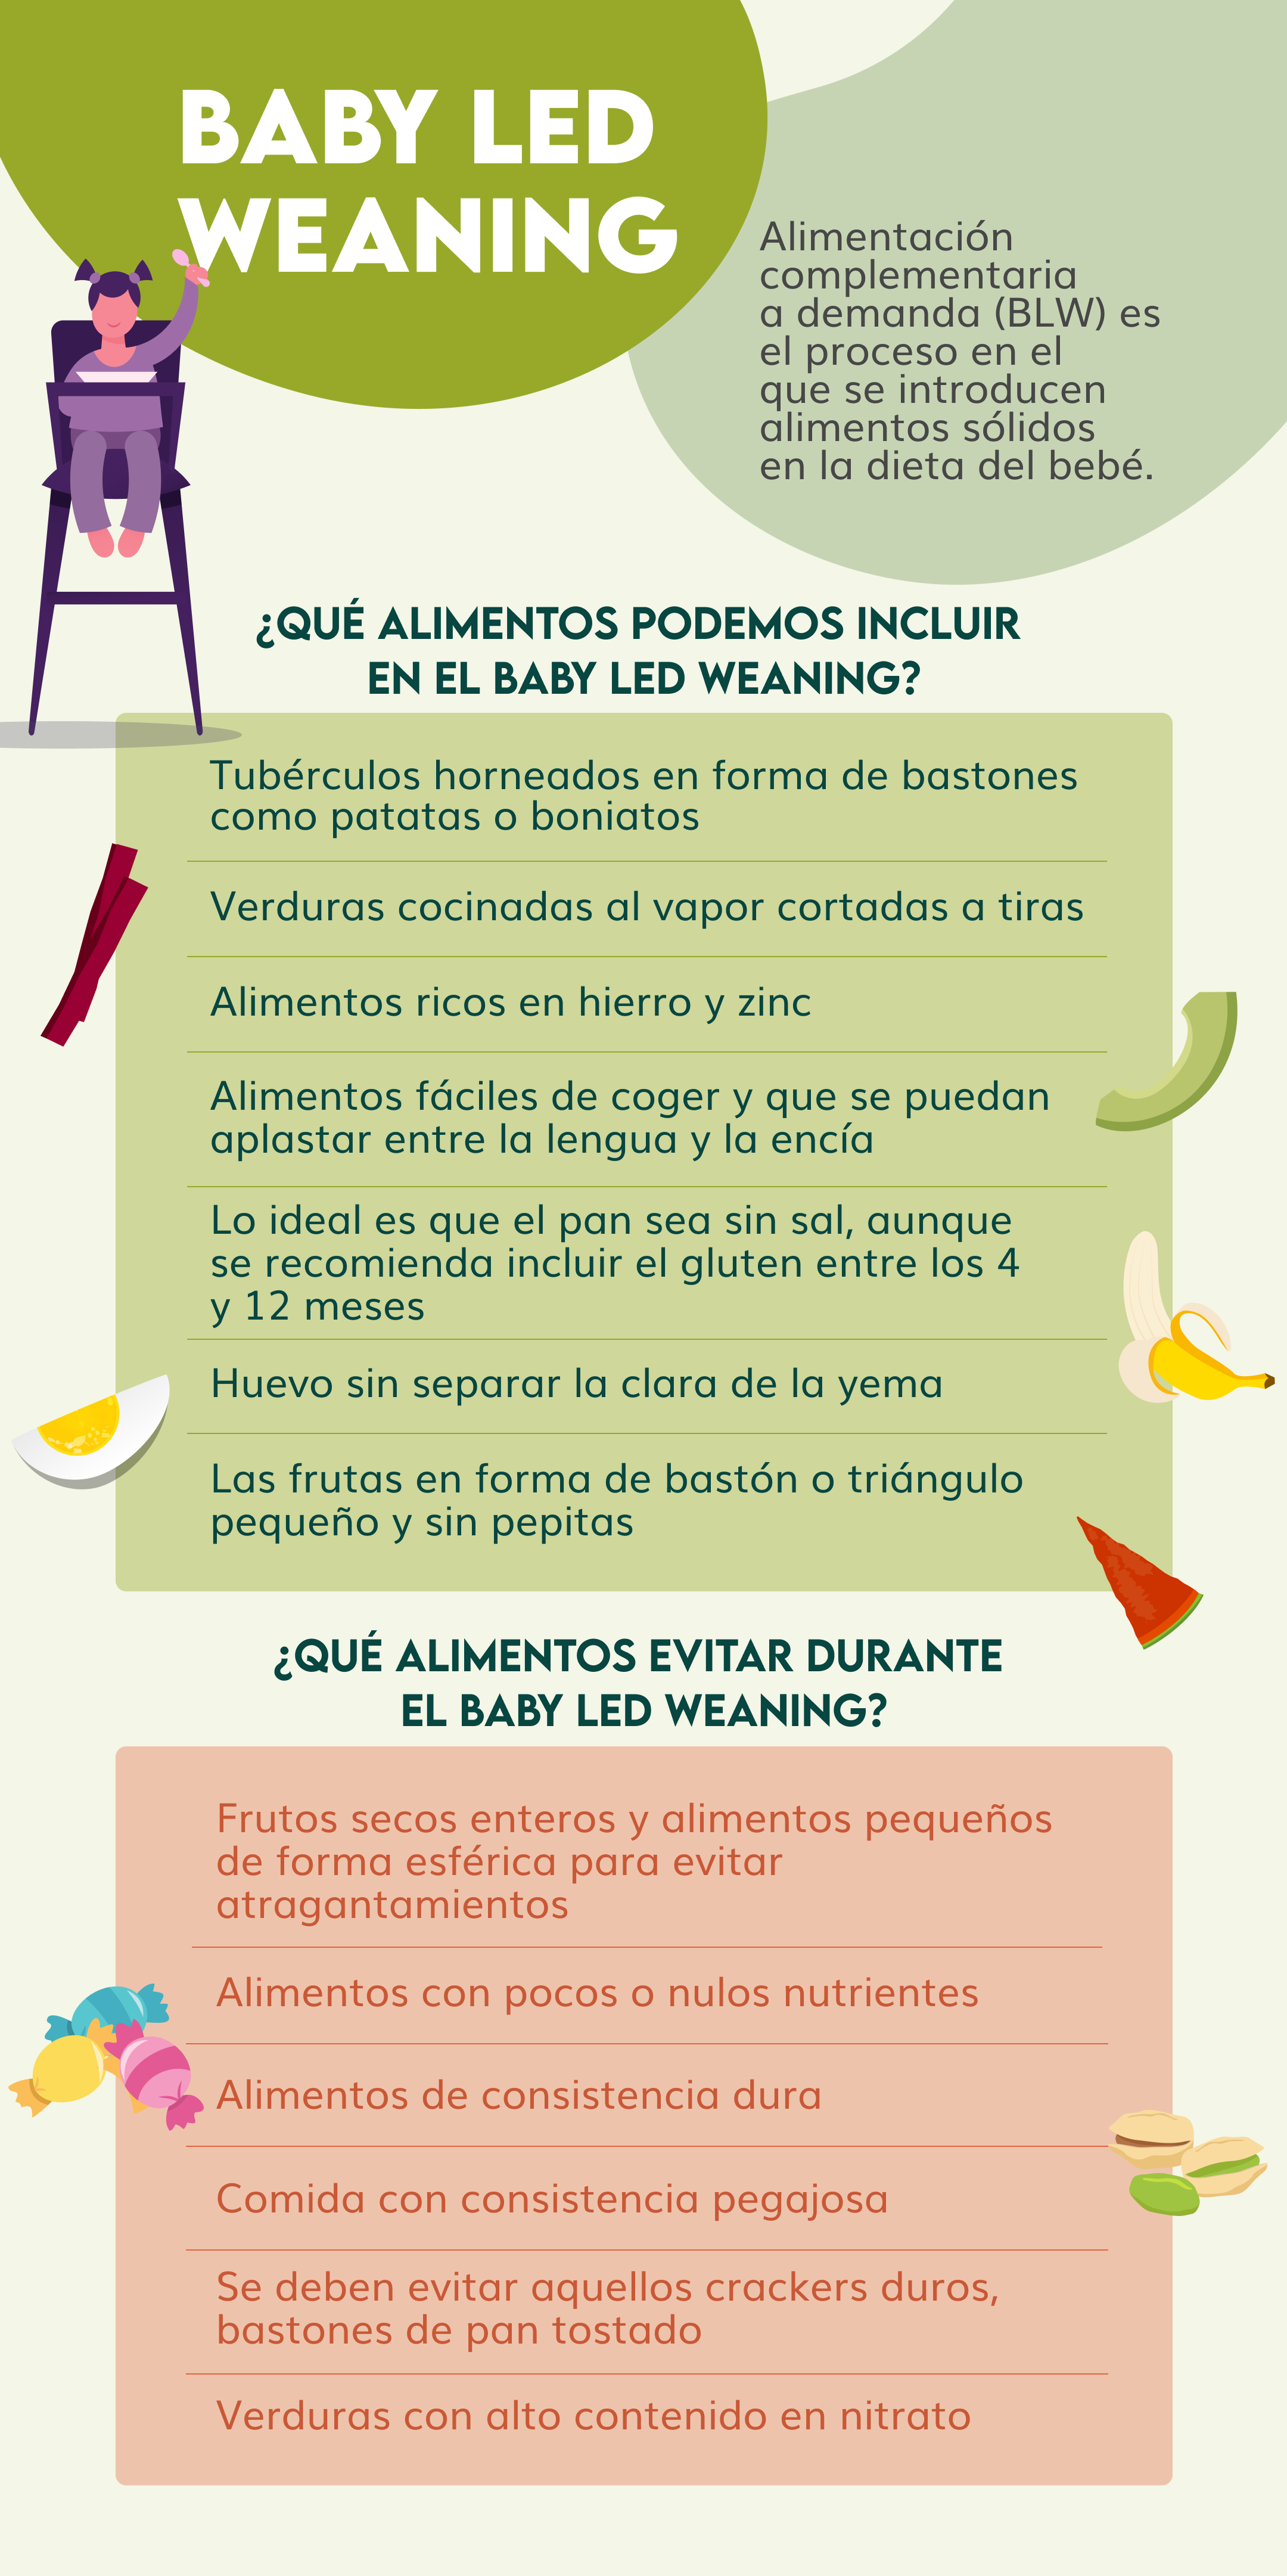 Baby led weaning: todo lo que debes saber del blw